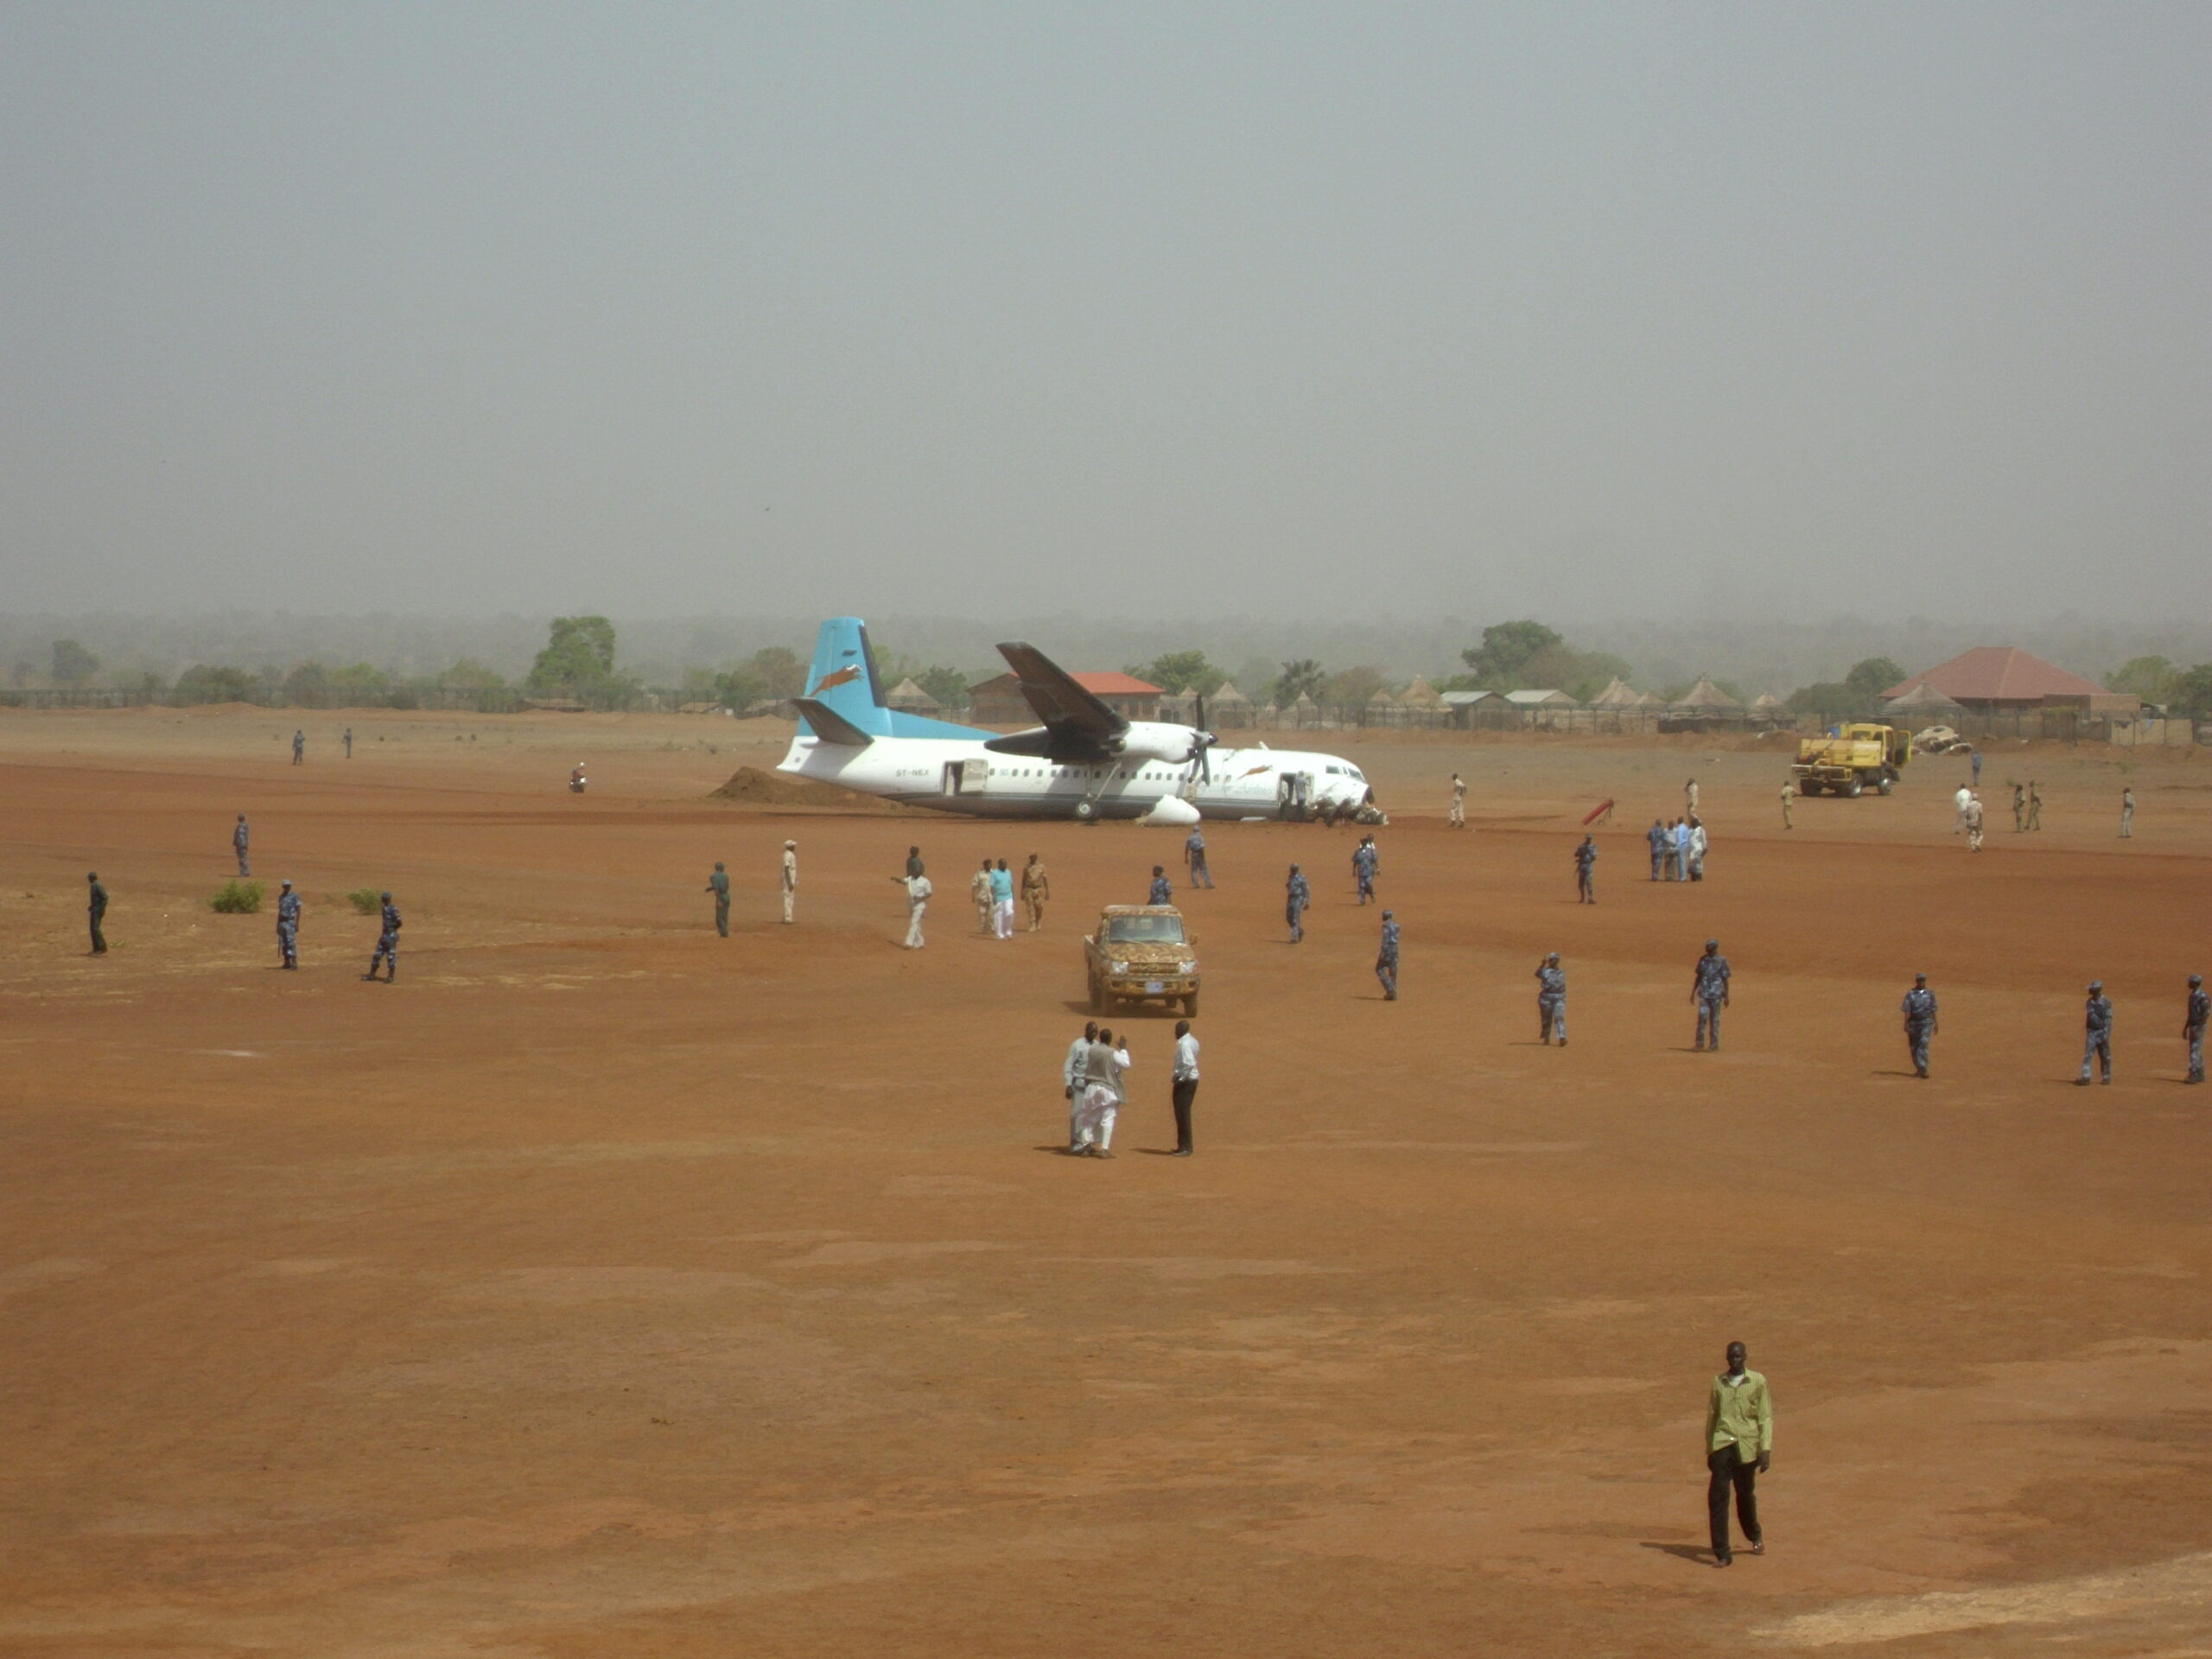 Feeder Airlines plane after the crash landing at Wau Airport, South Sudan, 29 March 2012 (Photo: Morris Ukel)